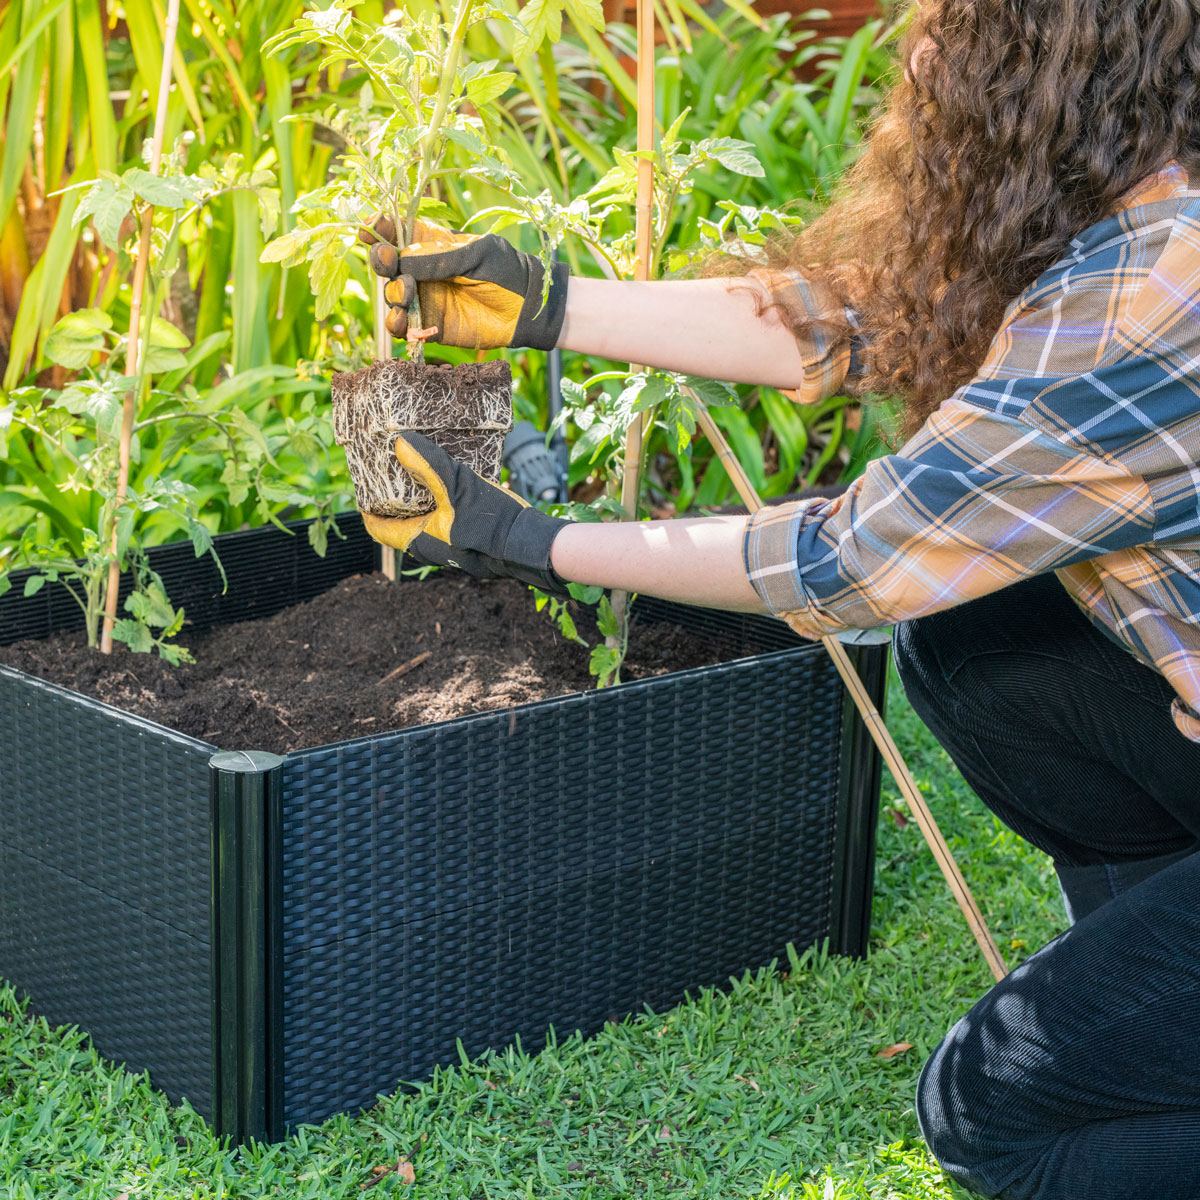 Planting veggies in raised garden beds and get your yard ready for winter